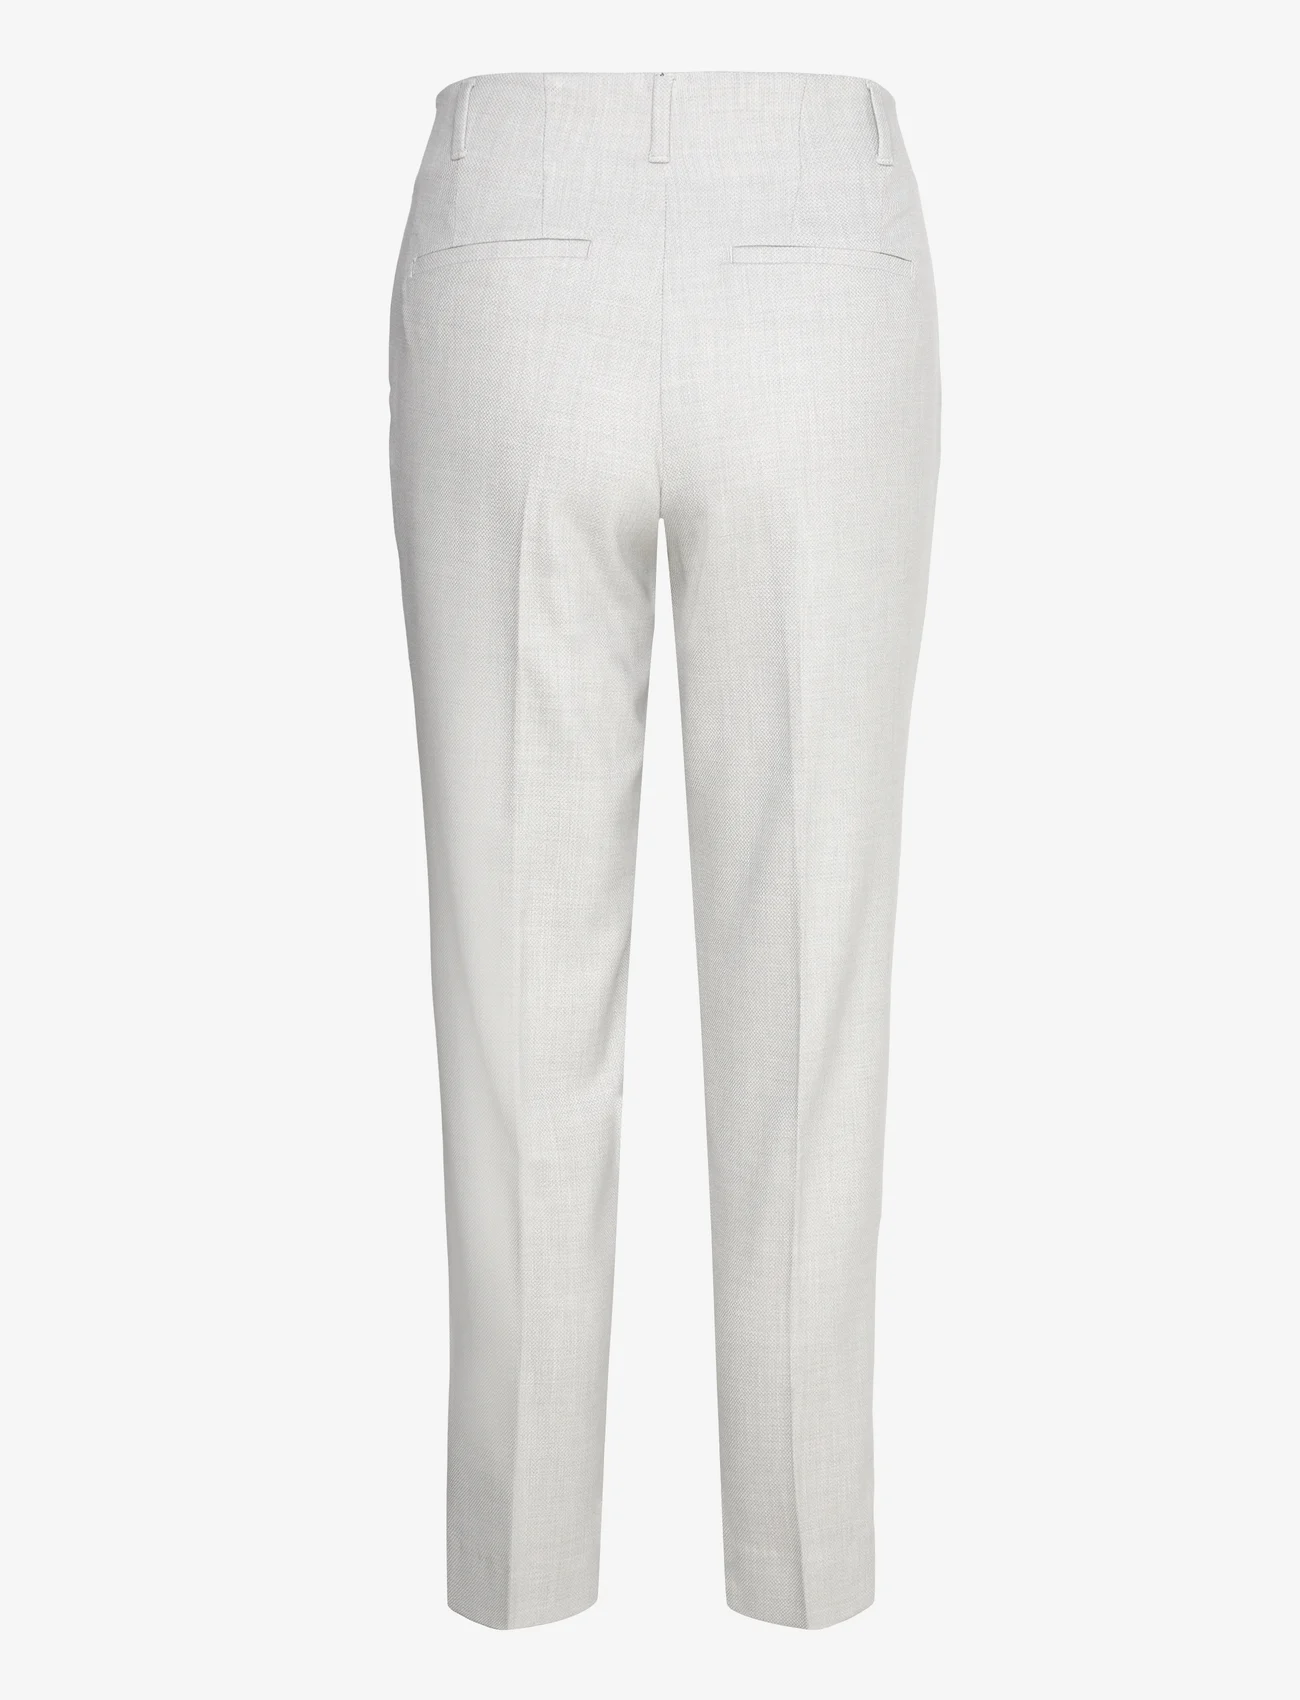 FIVEUNITS - JuliaFV - tailored trousers - oyster melange - 1